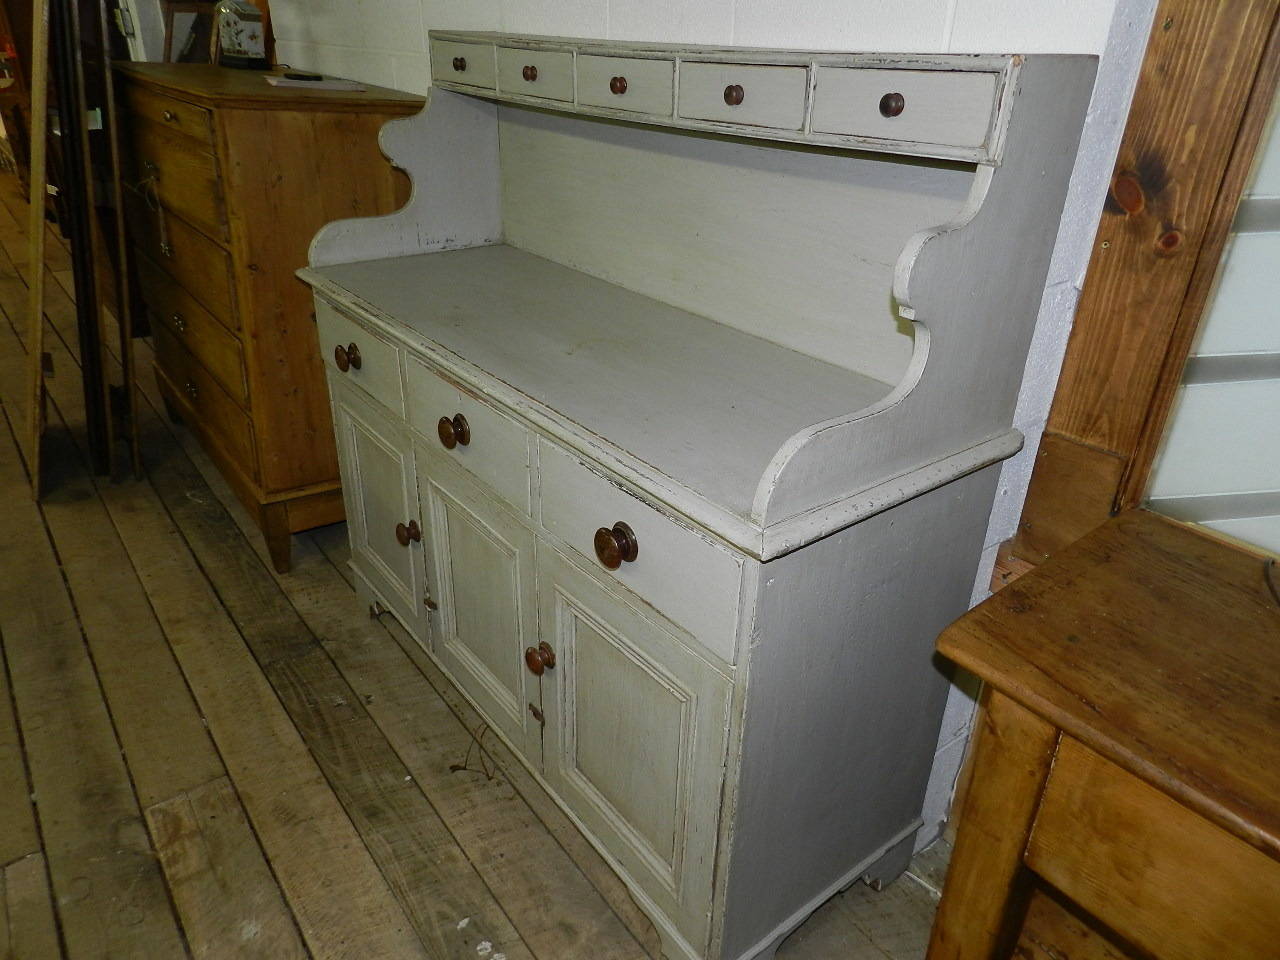 Scottish antique pine server with grey paint finish. Upper section has five small dovetailed drawers. The lower section has three dovetailed drawers over three paneled doors. All the drawers have mahogany wooden knobs.